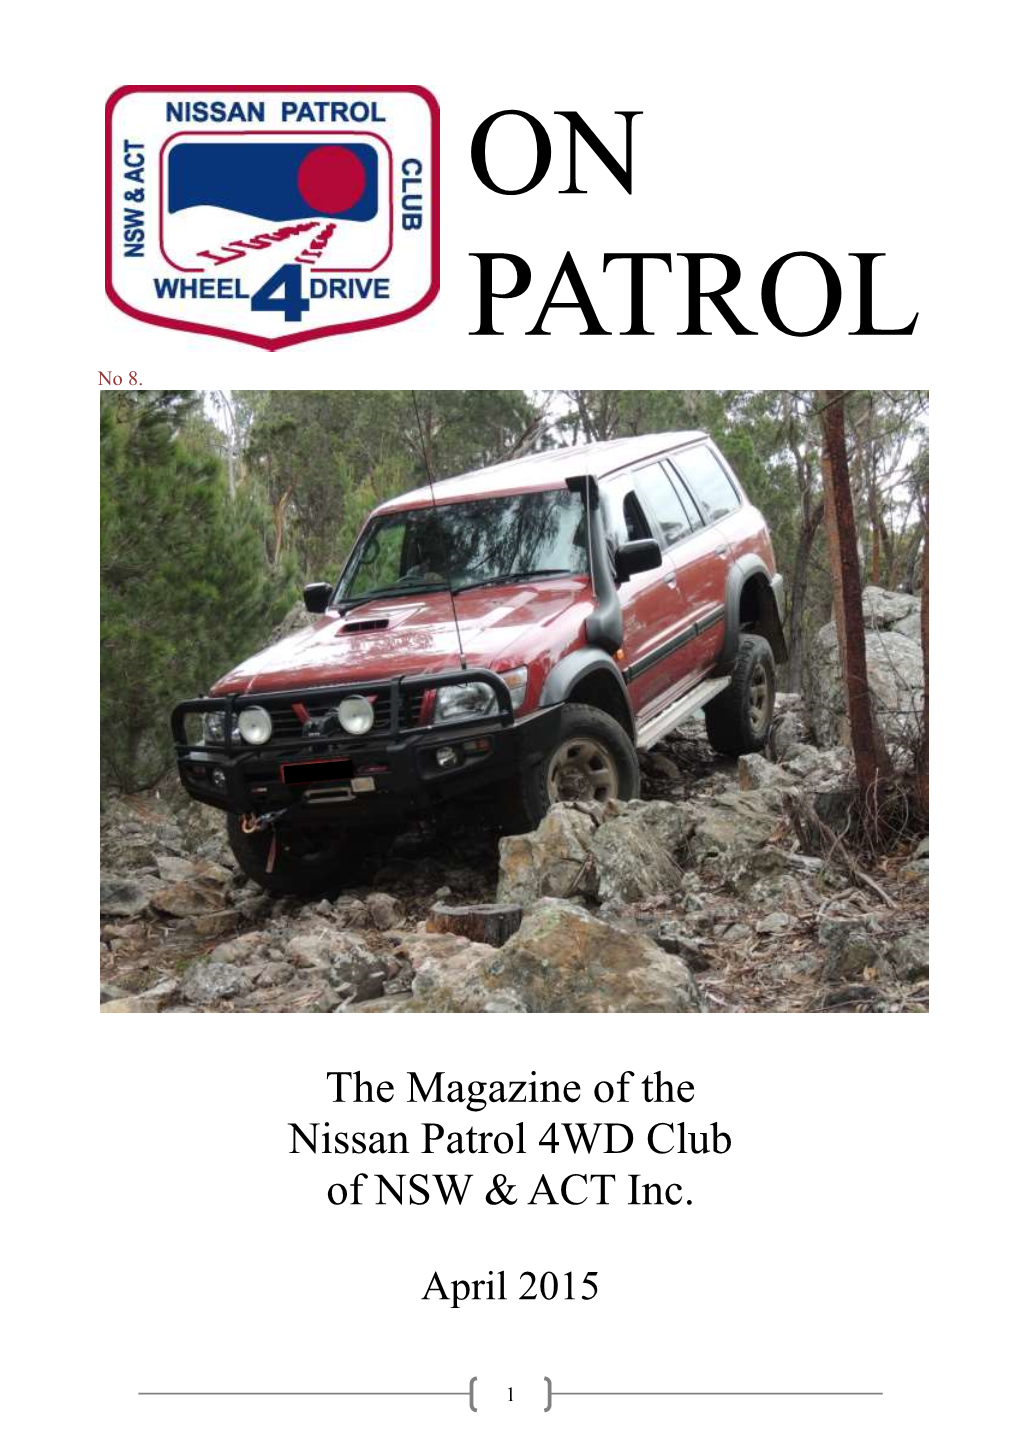 The Magazine of the Nissan Patrol 4WD Club of NSW & ACT Inc